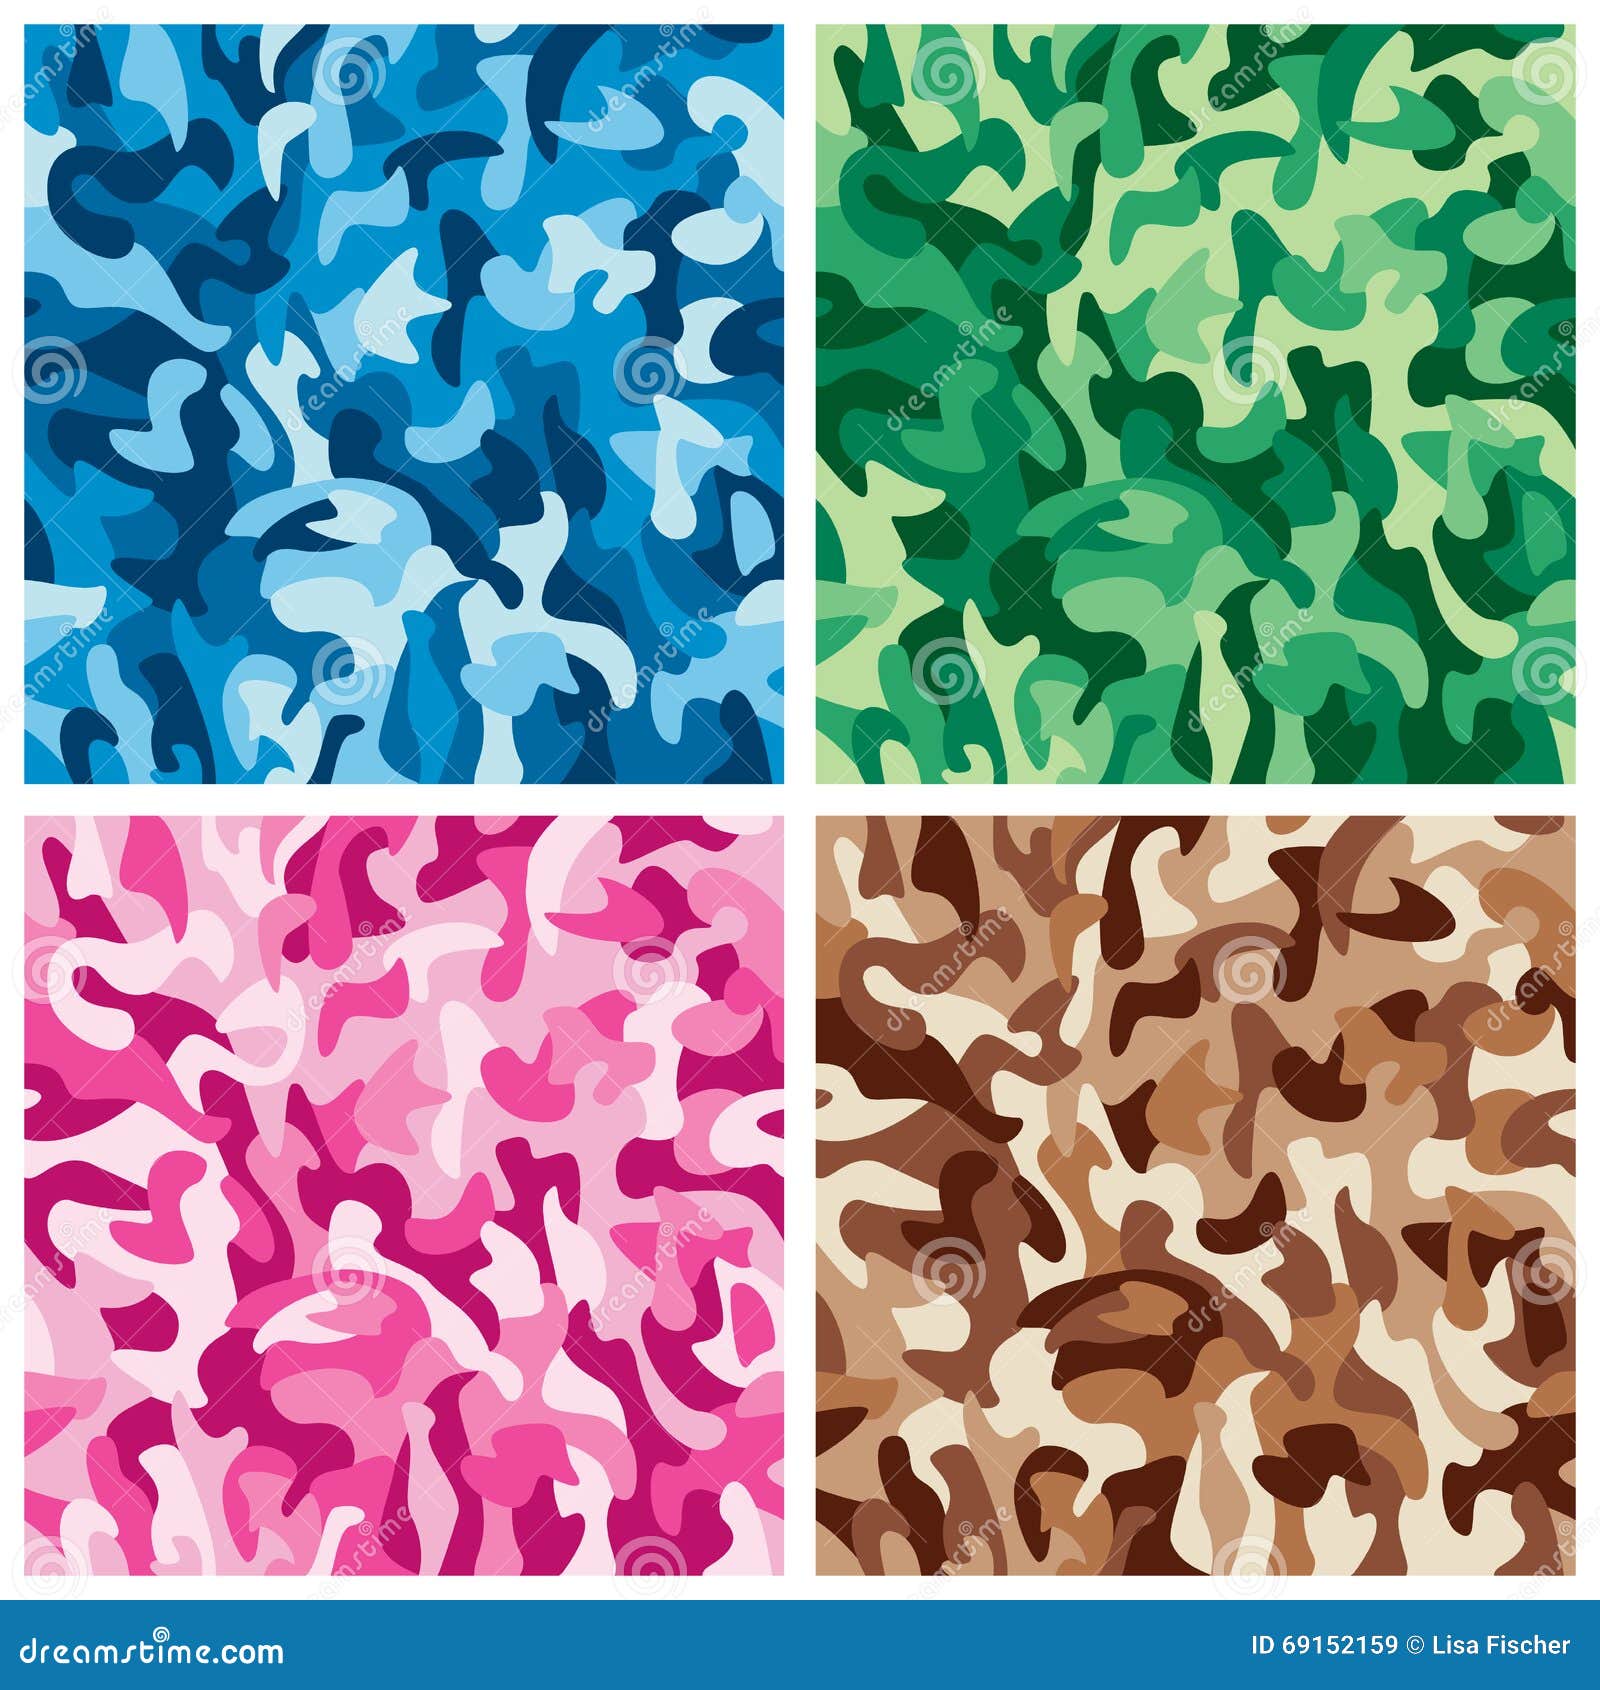 Download Monochrome Camouflage Patterns Stock Vector - Illustration ...